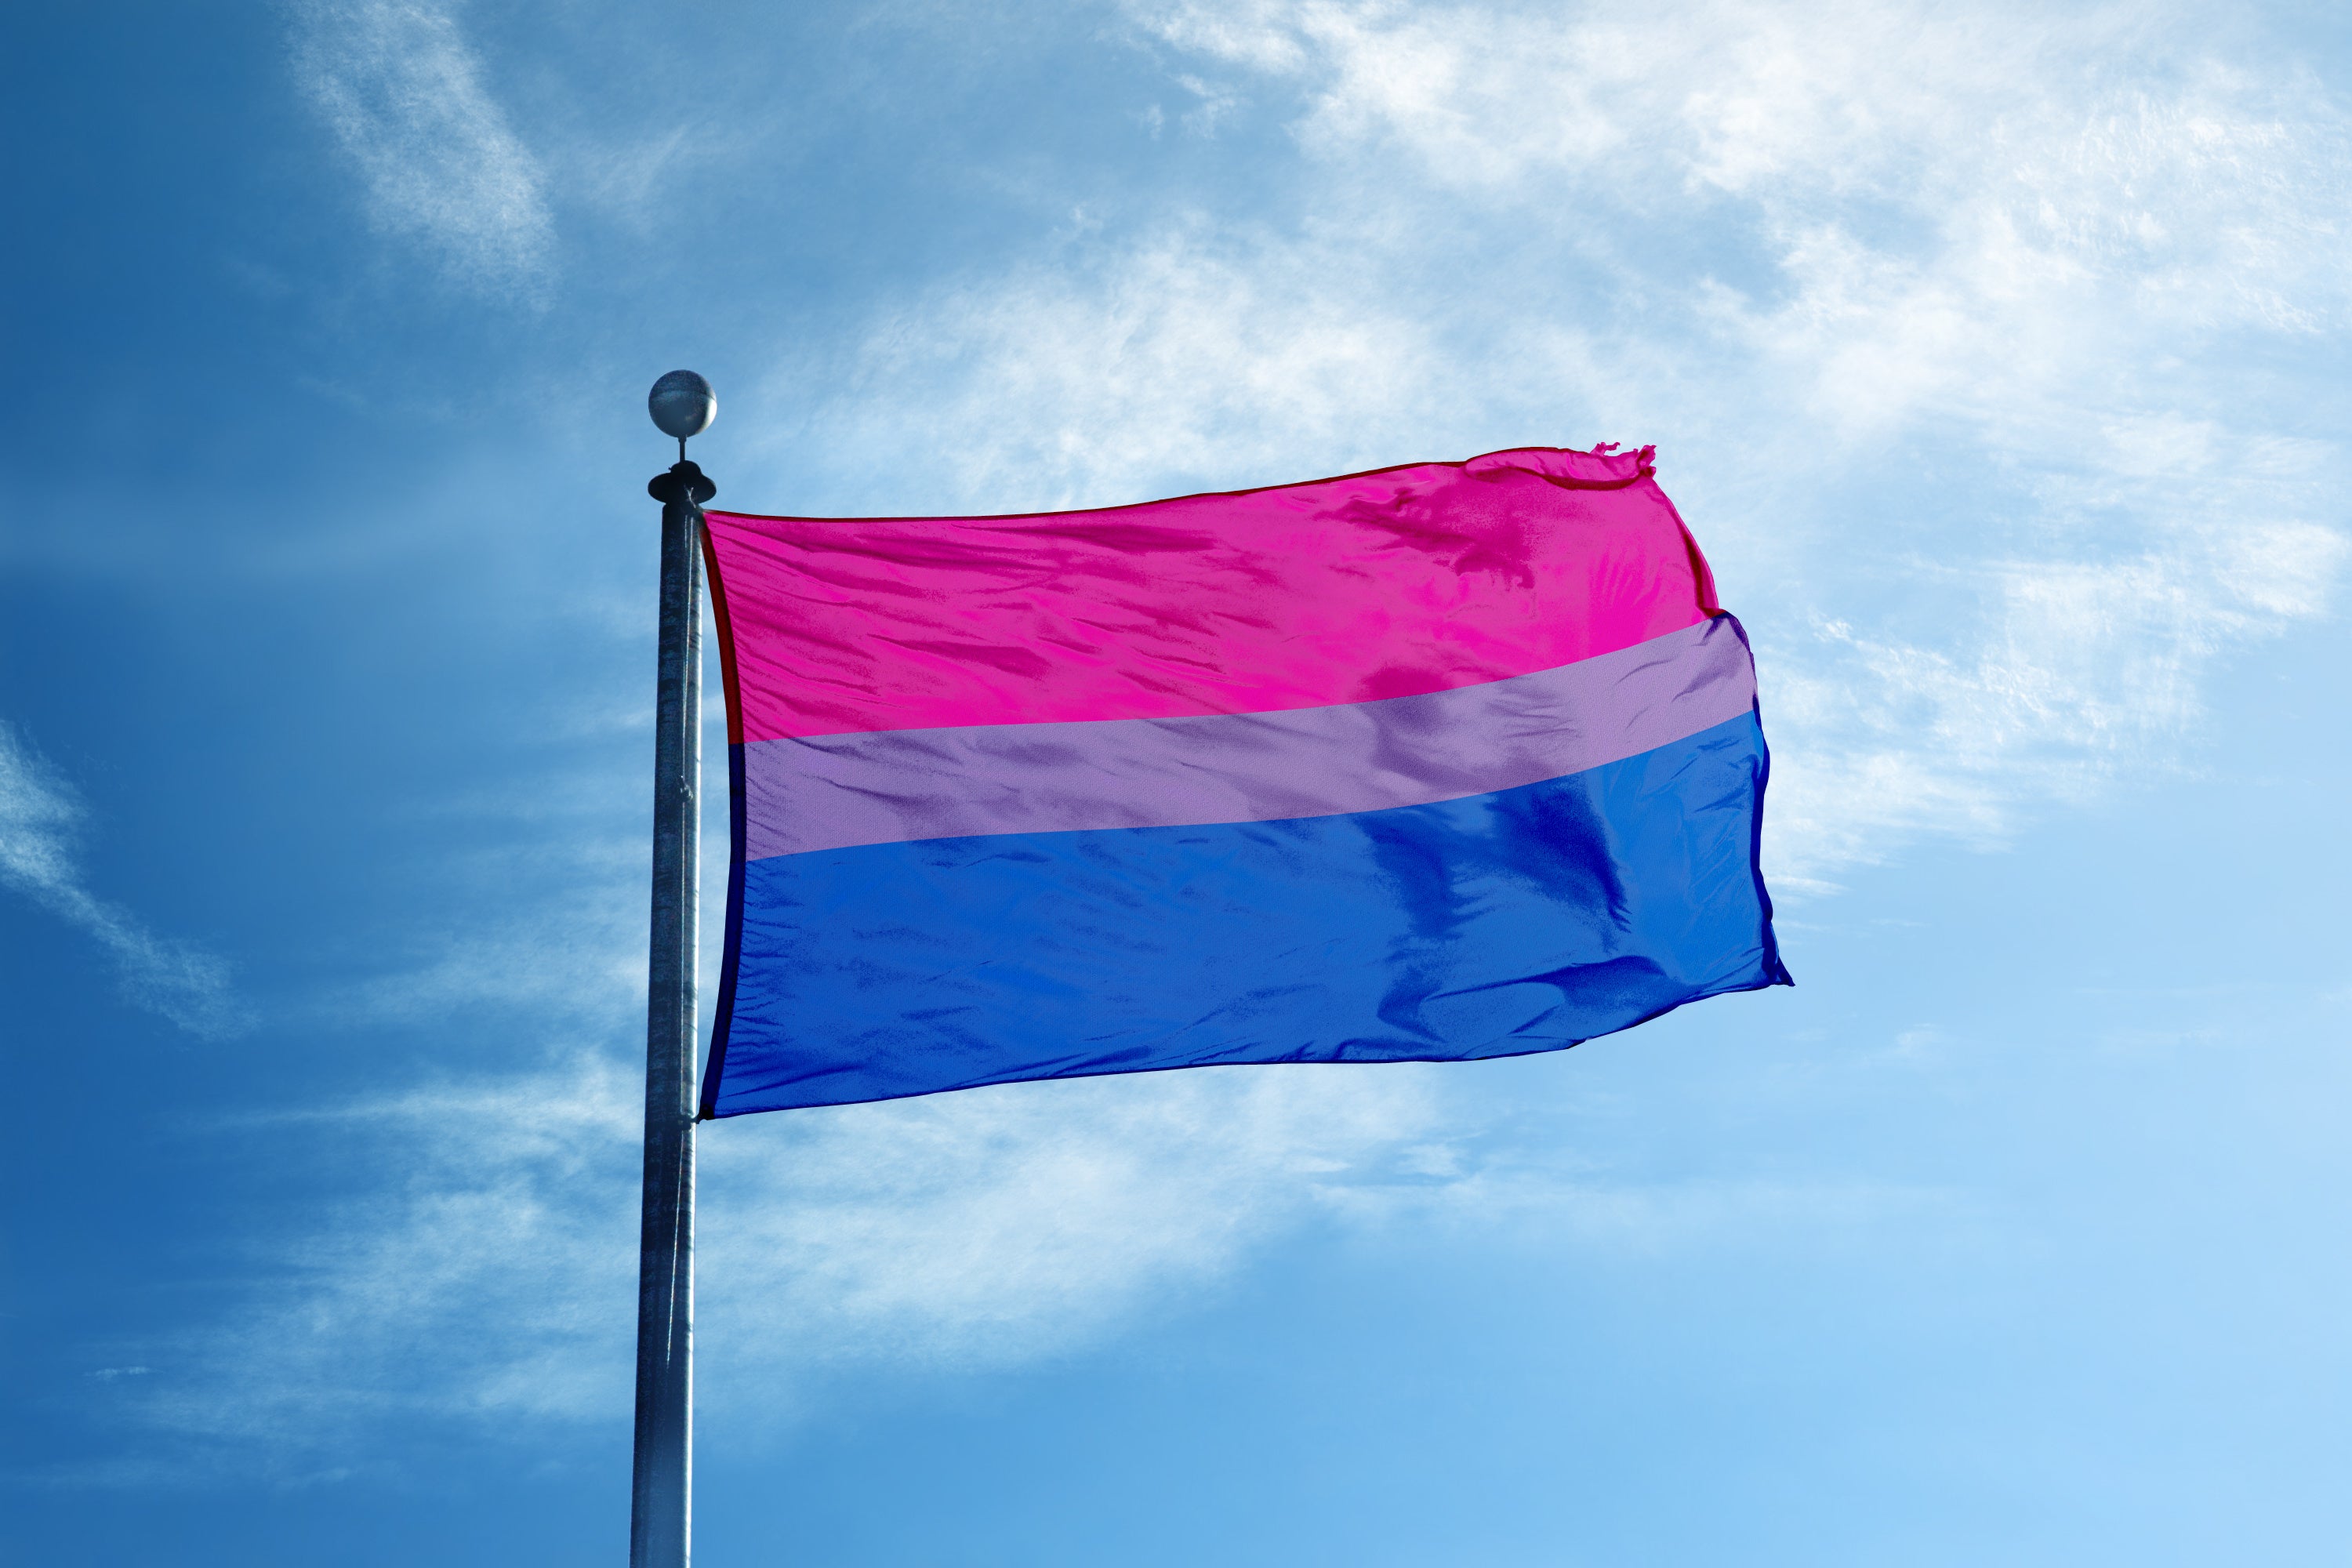 Bisexual Flag | What Colour is the Bisexual Flag